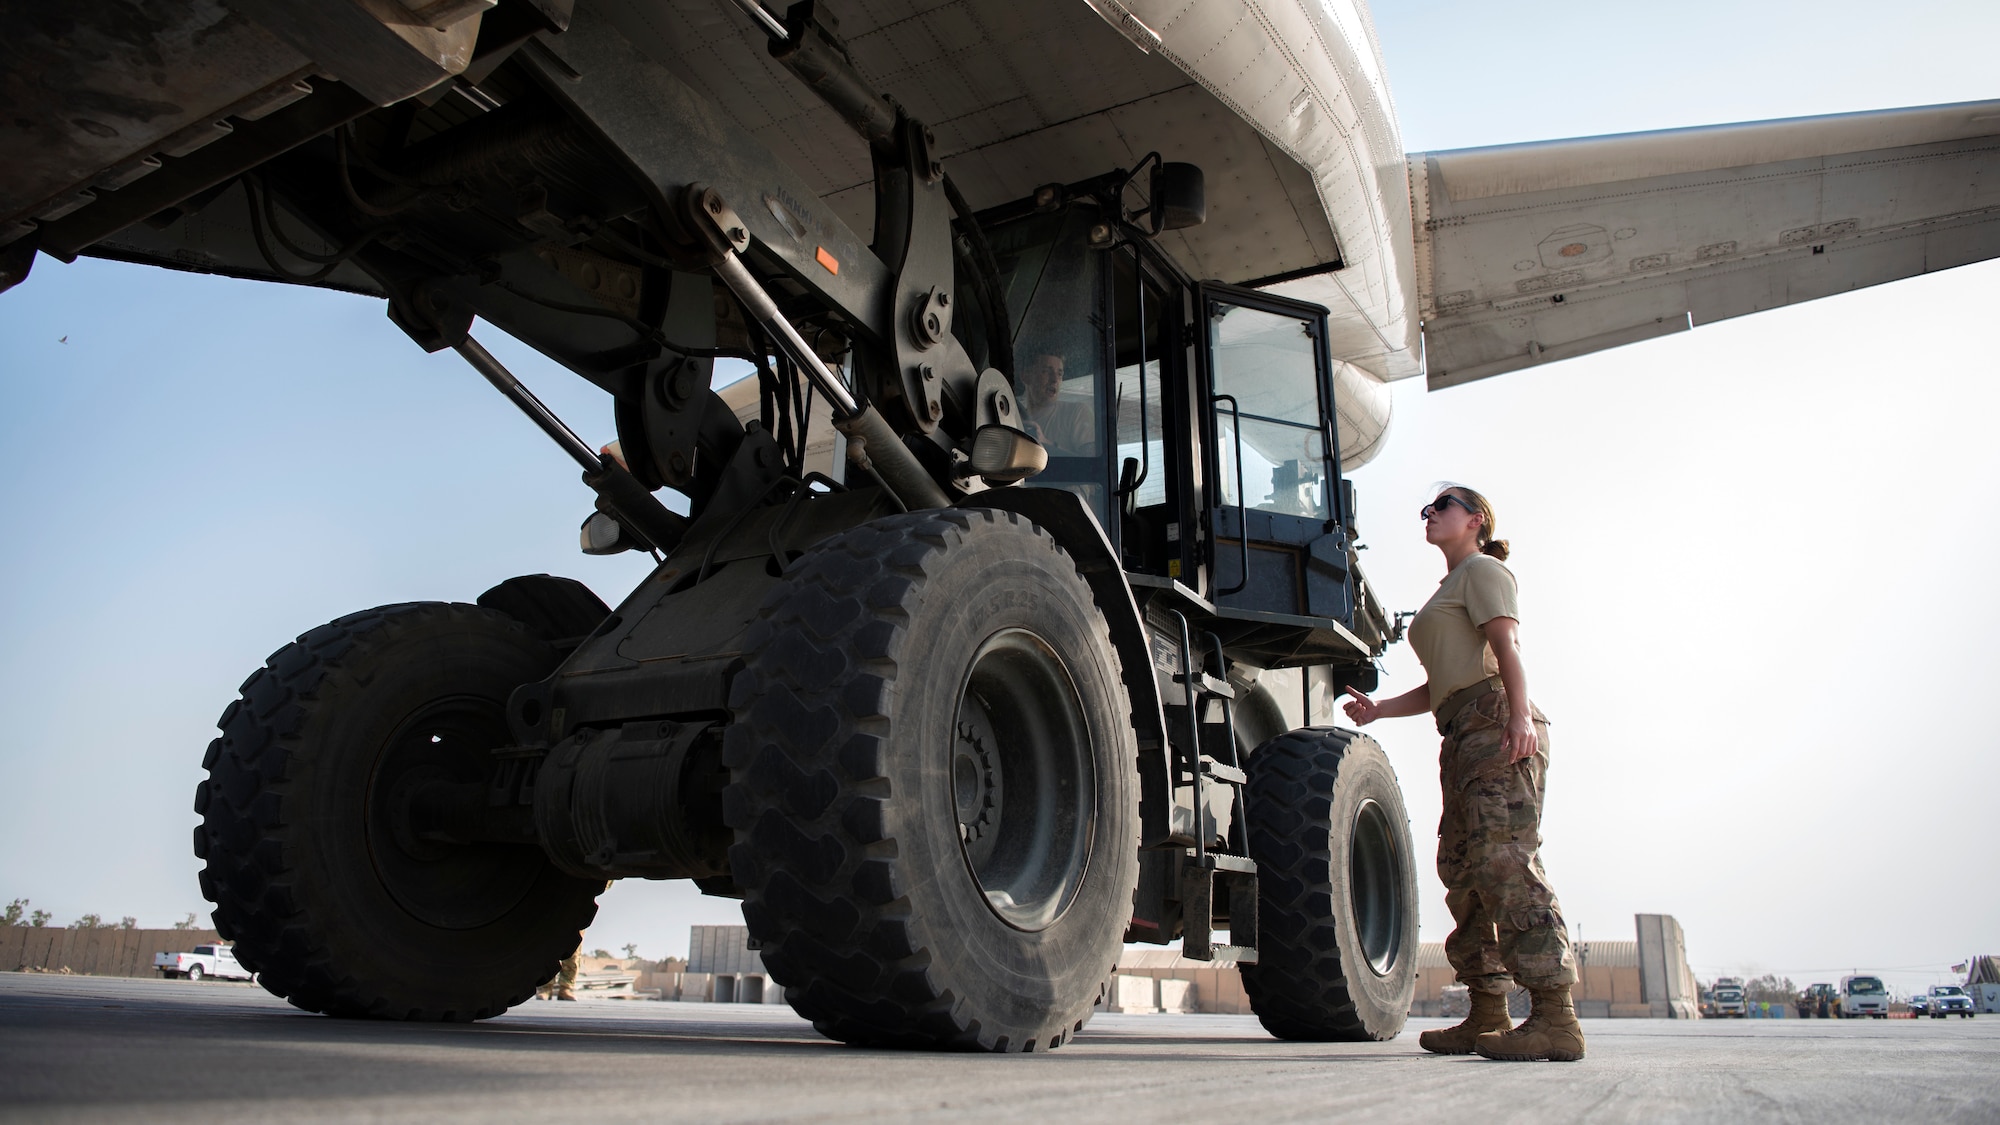 Airman 1st Class Ariel Santos, 442nd Air Expeditionary Squadron aerial porter, directs a K-loader during an aircraft unloading, June 7, 2018, at Camp Taji, Iraq.